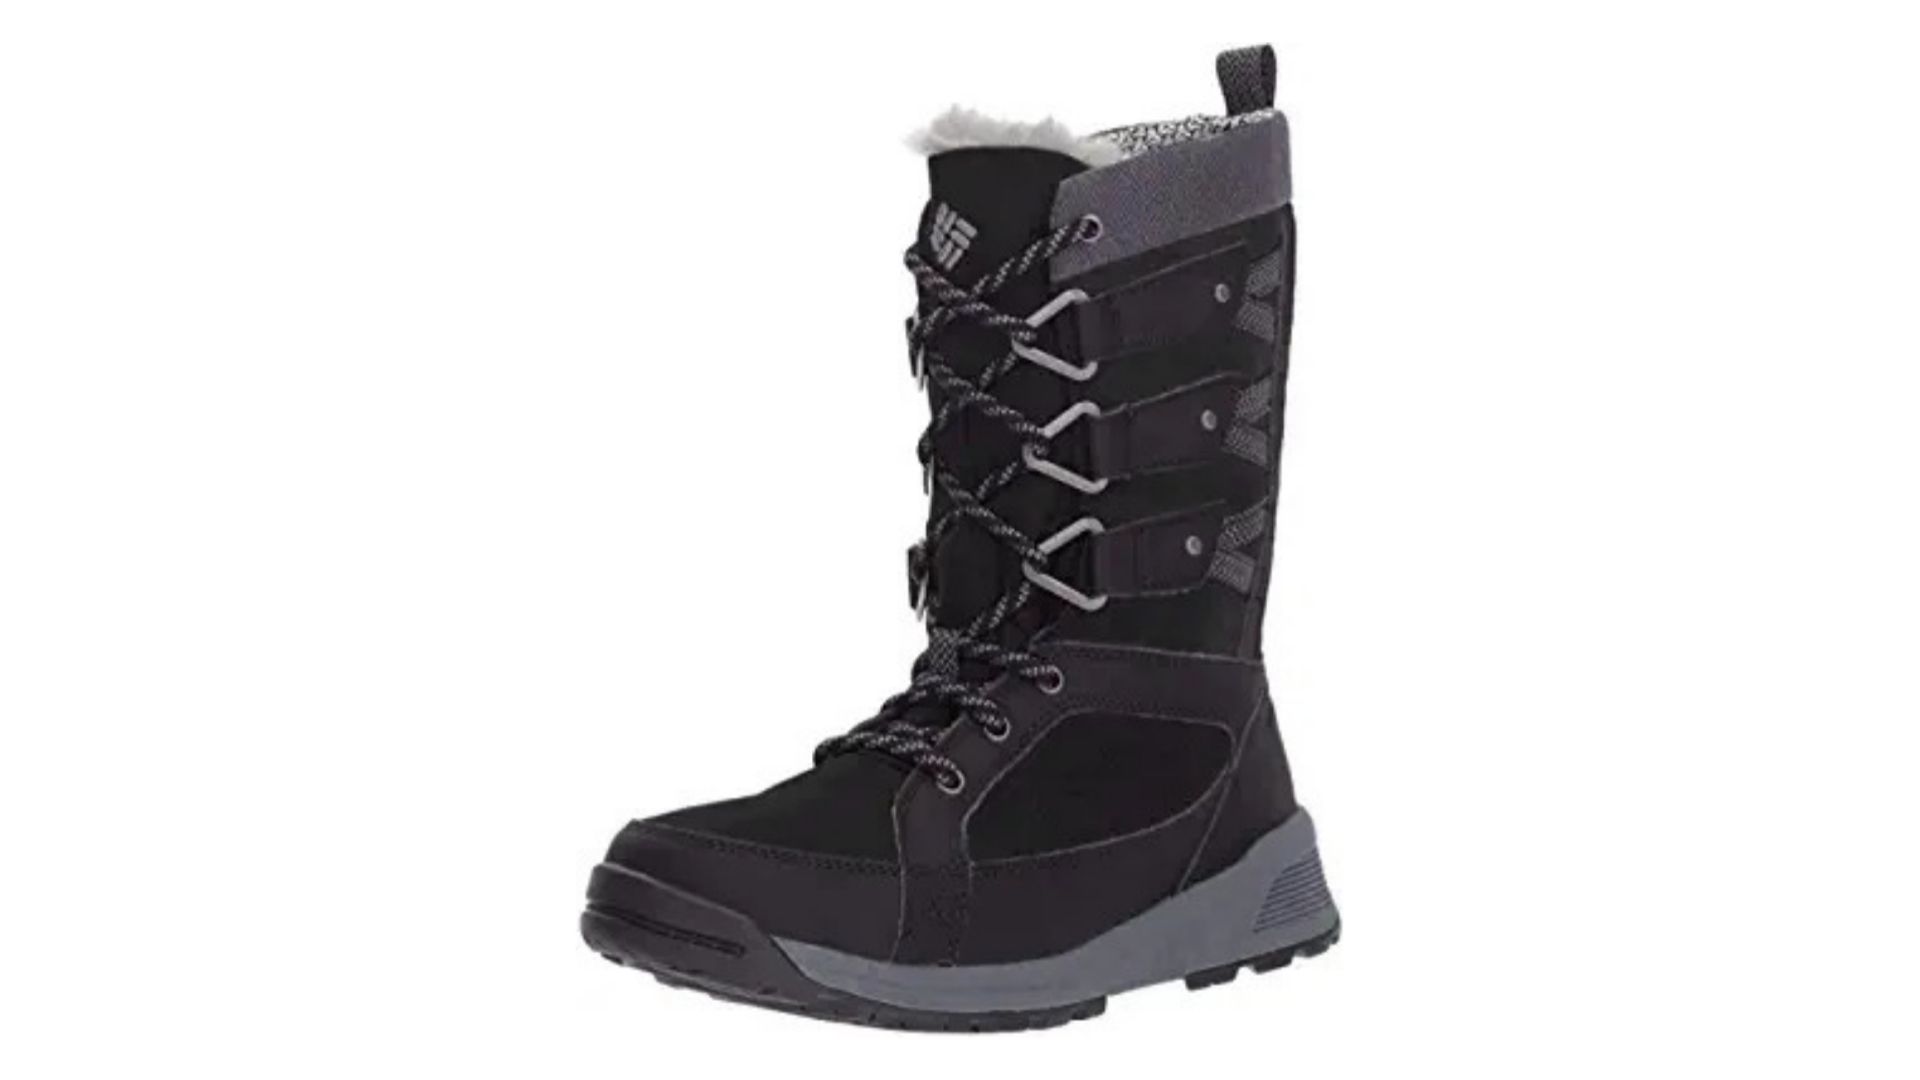 Best Snow Boots for Women (Review & Buying Guide) in 2022 - Task & Purpose